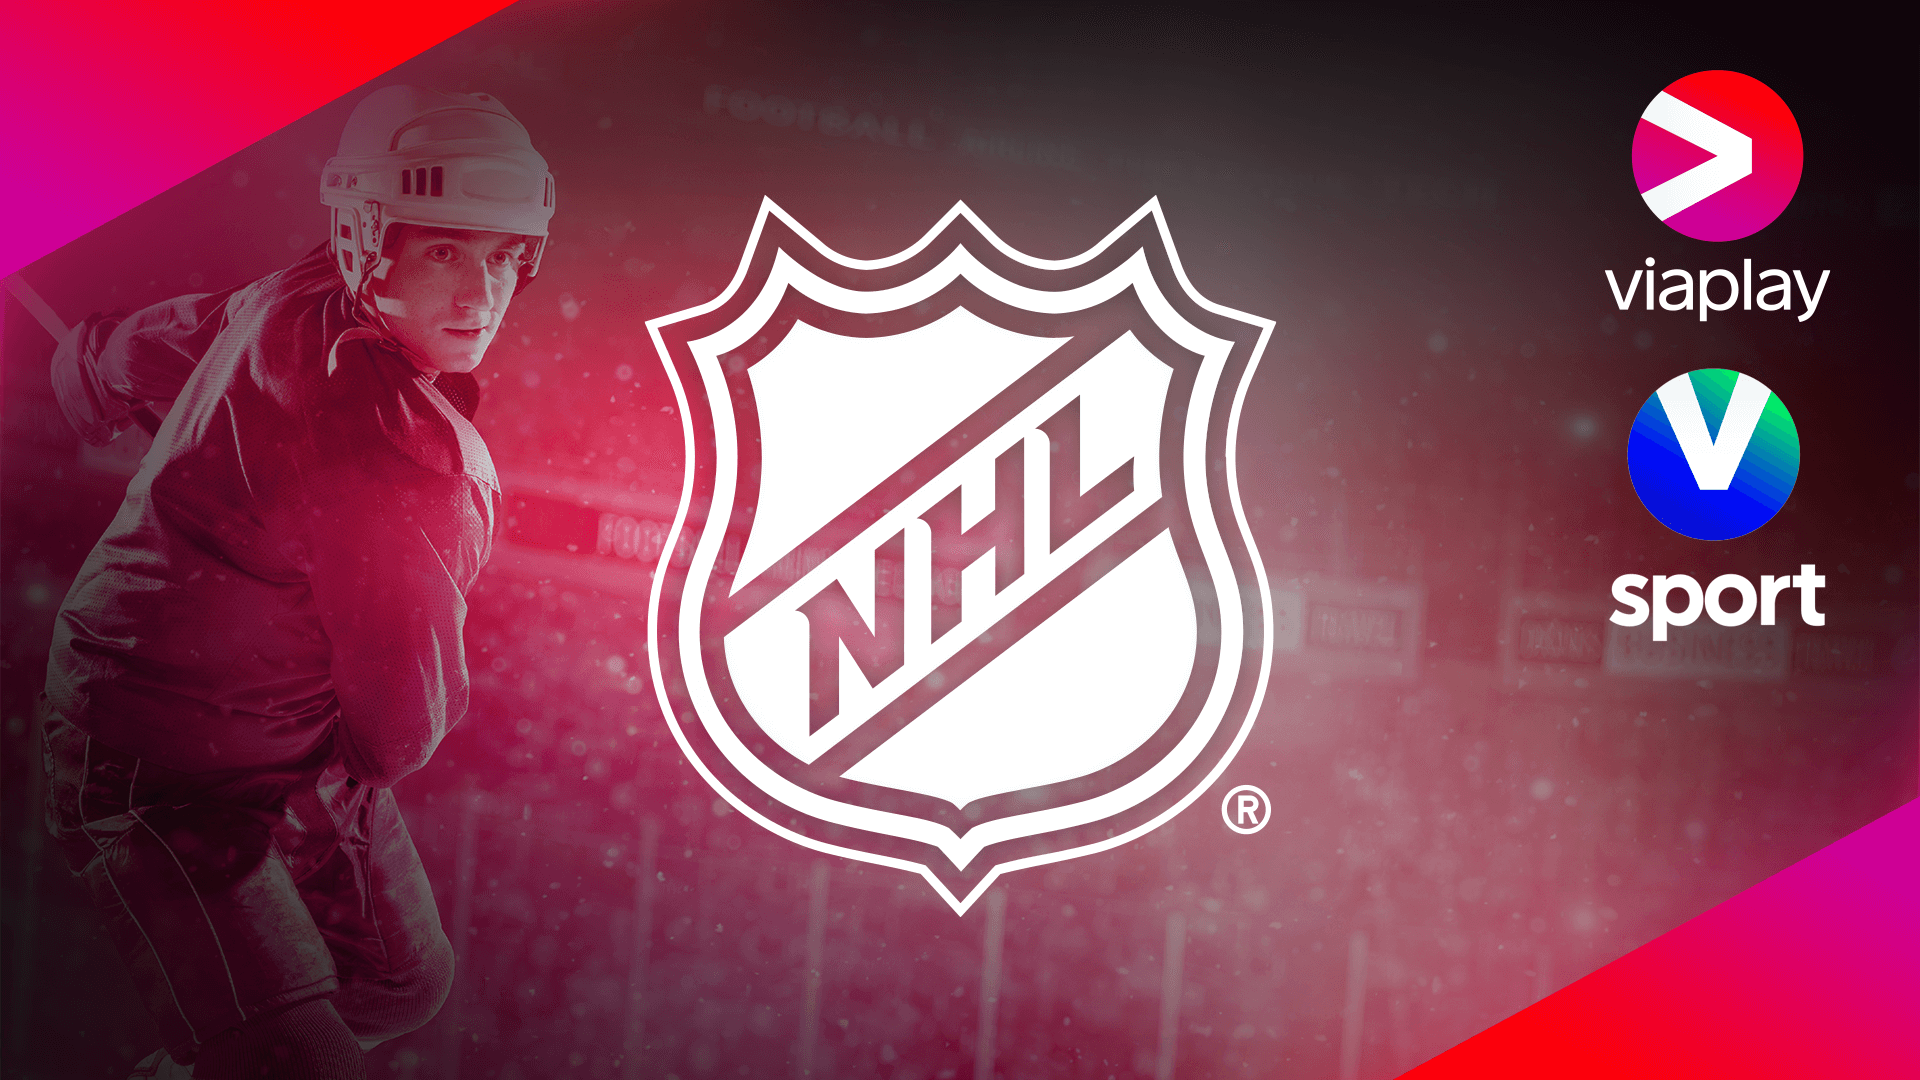 An advertisement image of the NHL featuring an ice hockey player in the background. On the right side of the image, there are Viaplay and V-sporting logos.